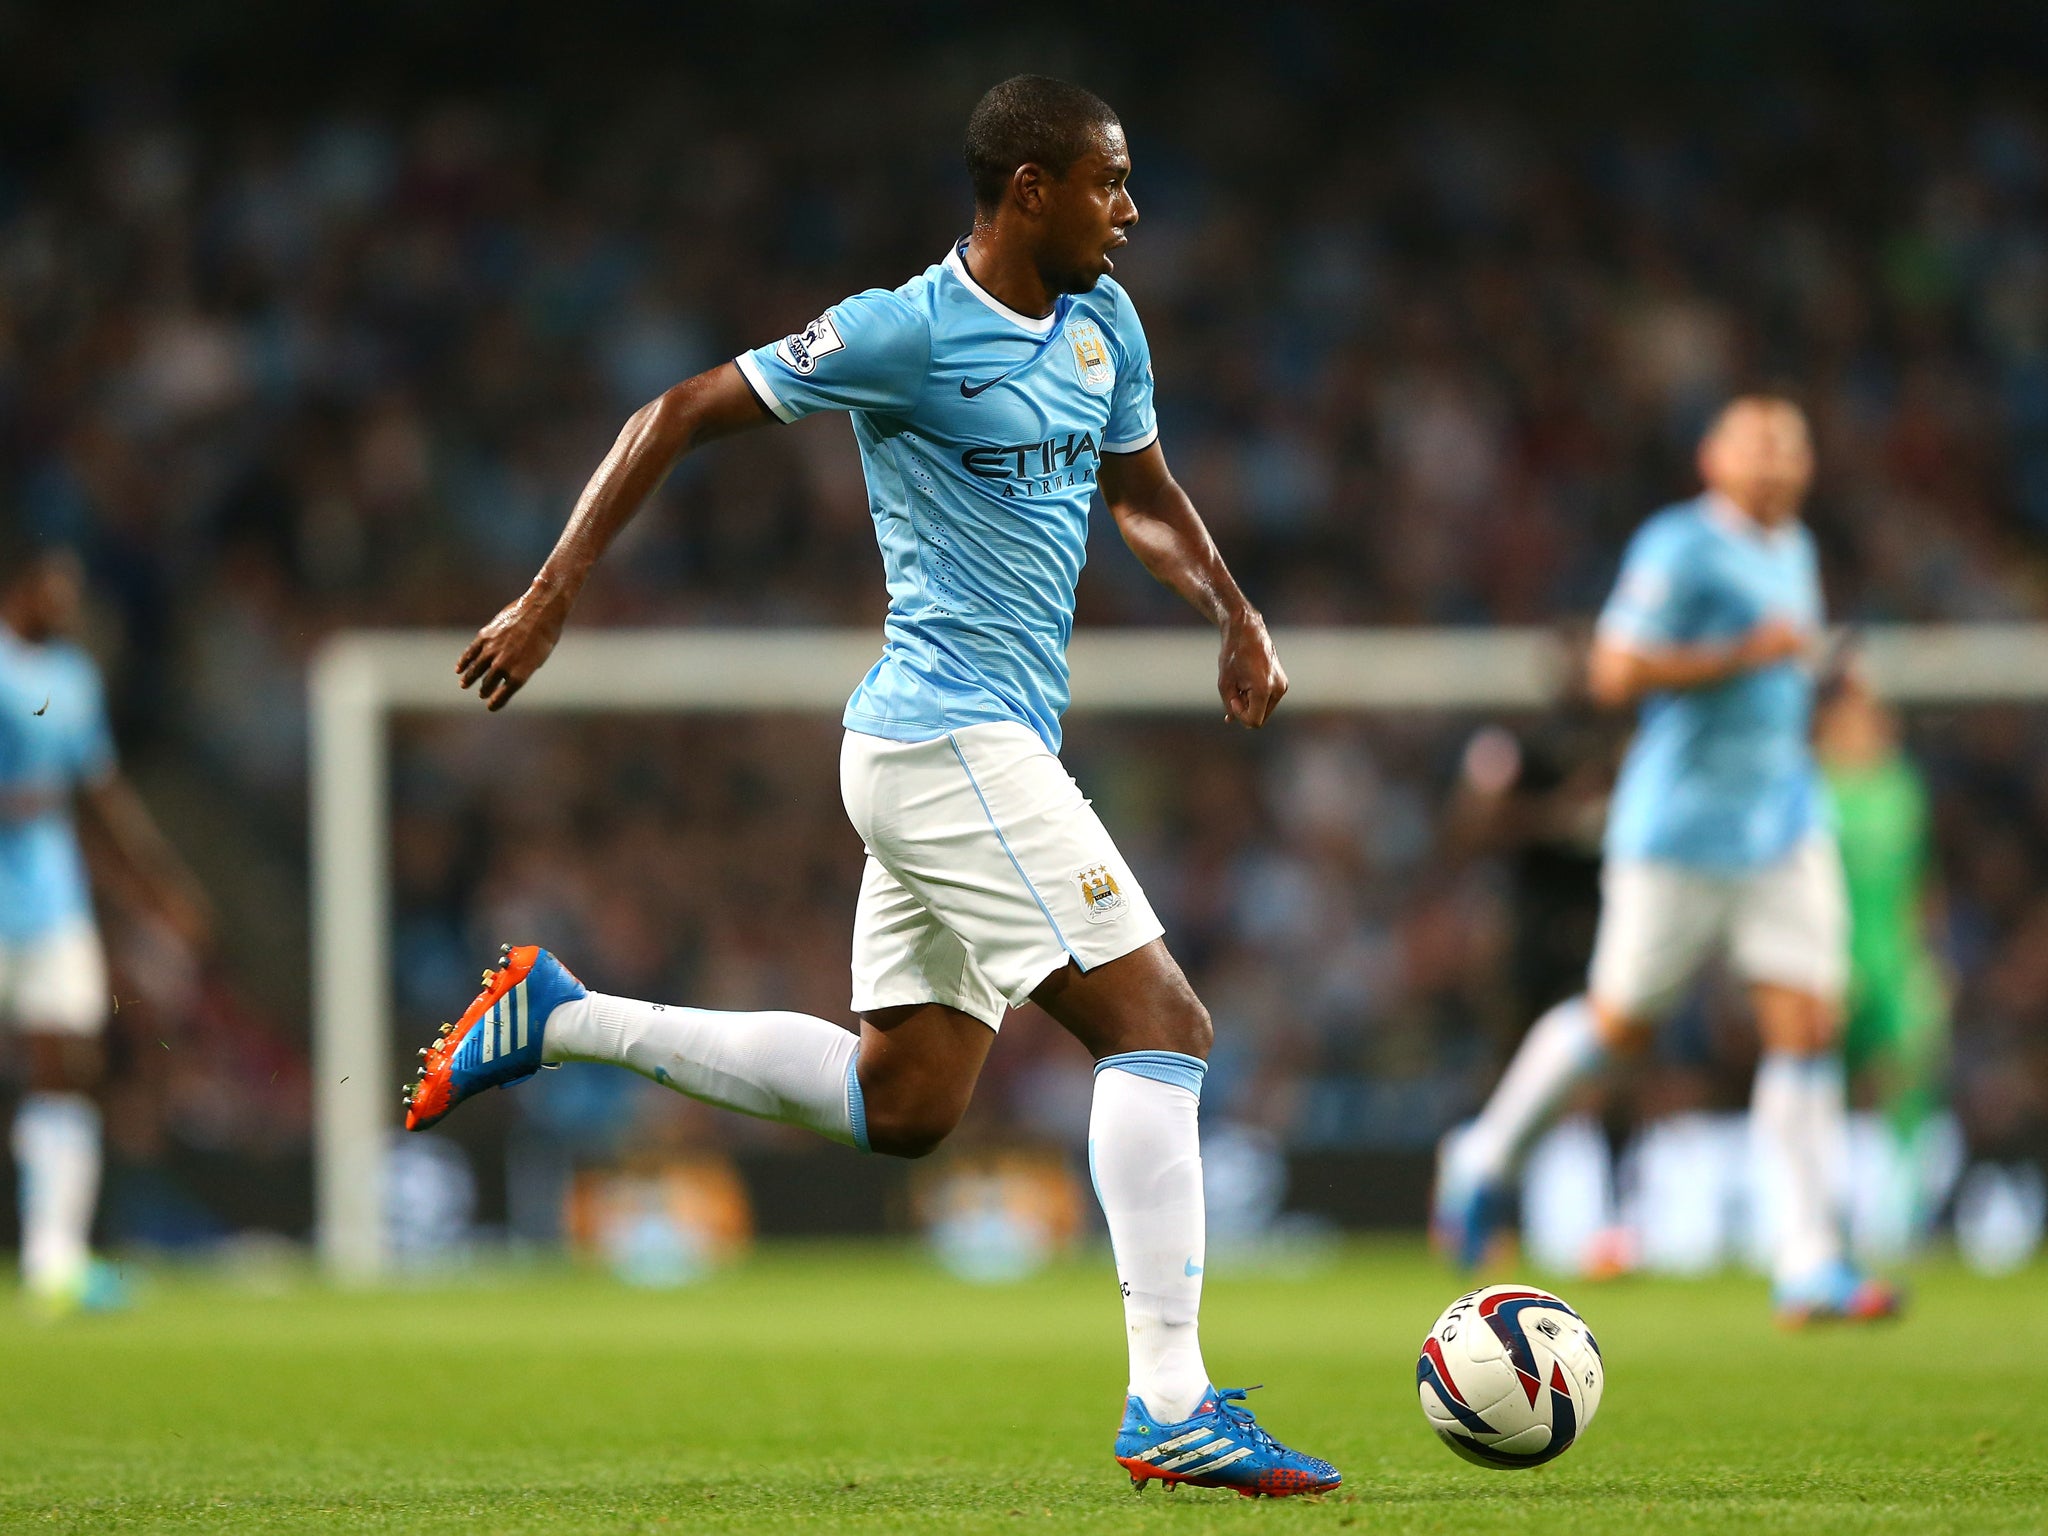 Manchester City Fernandinho was one of five new signings this summer